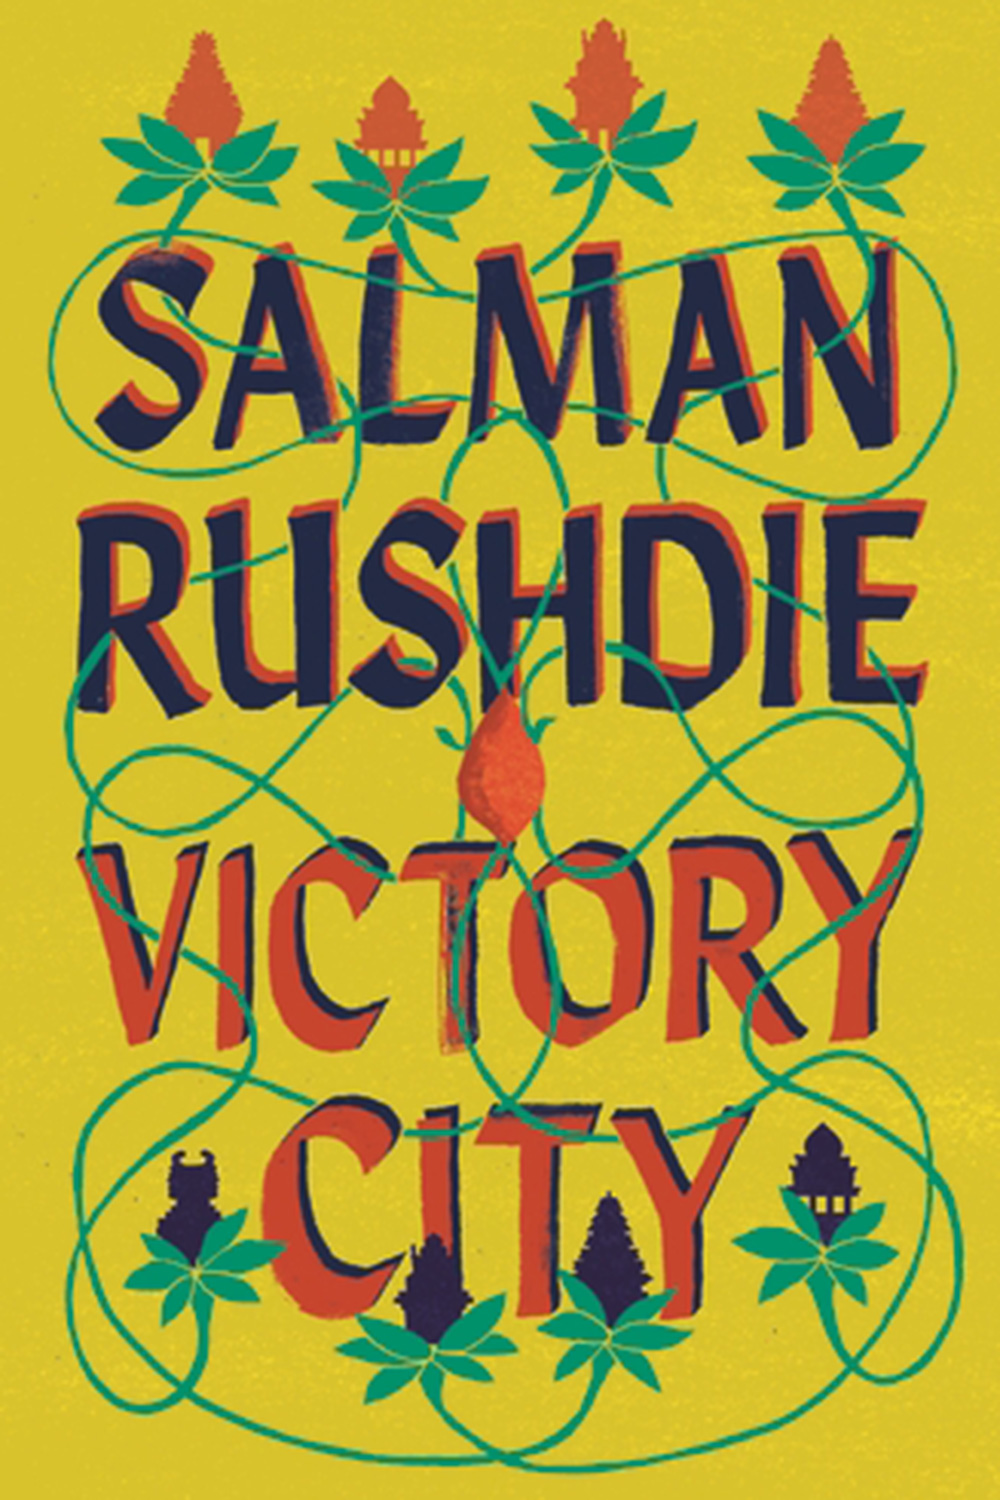 The front cover of Salmon Rushdie